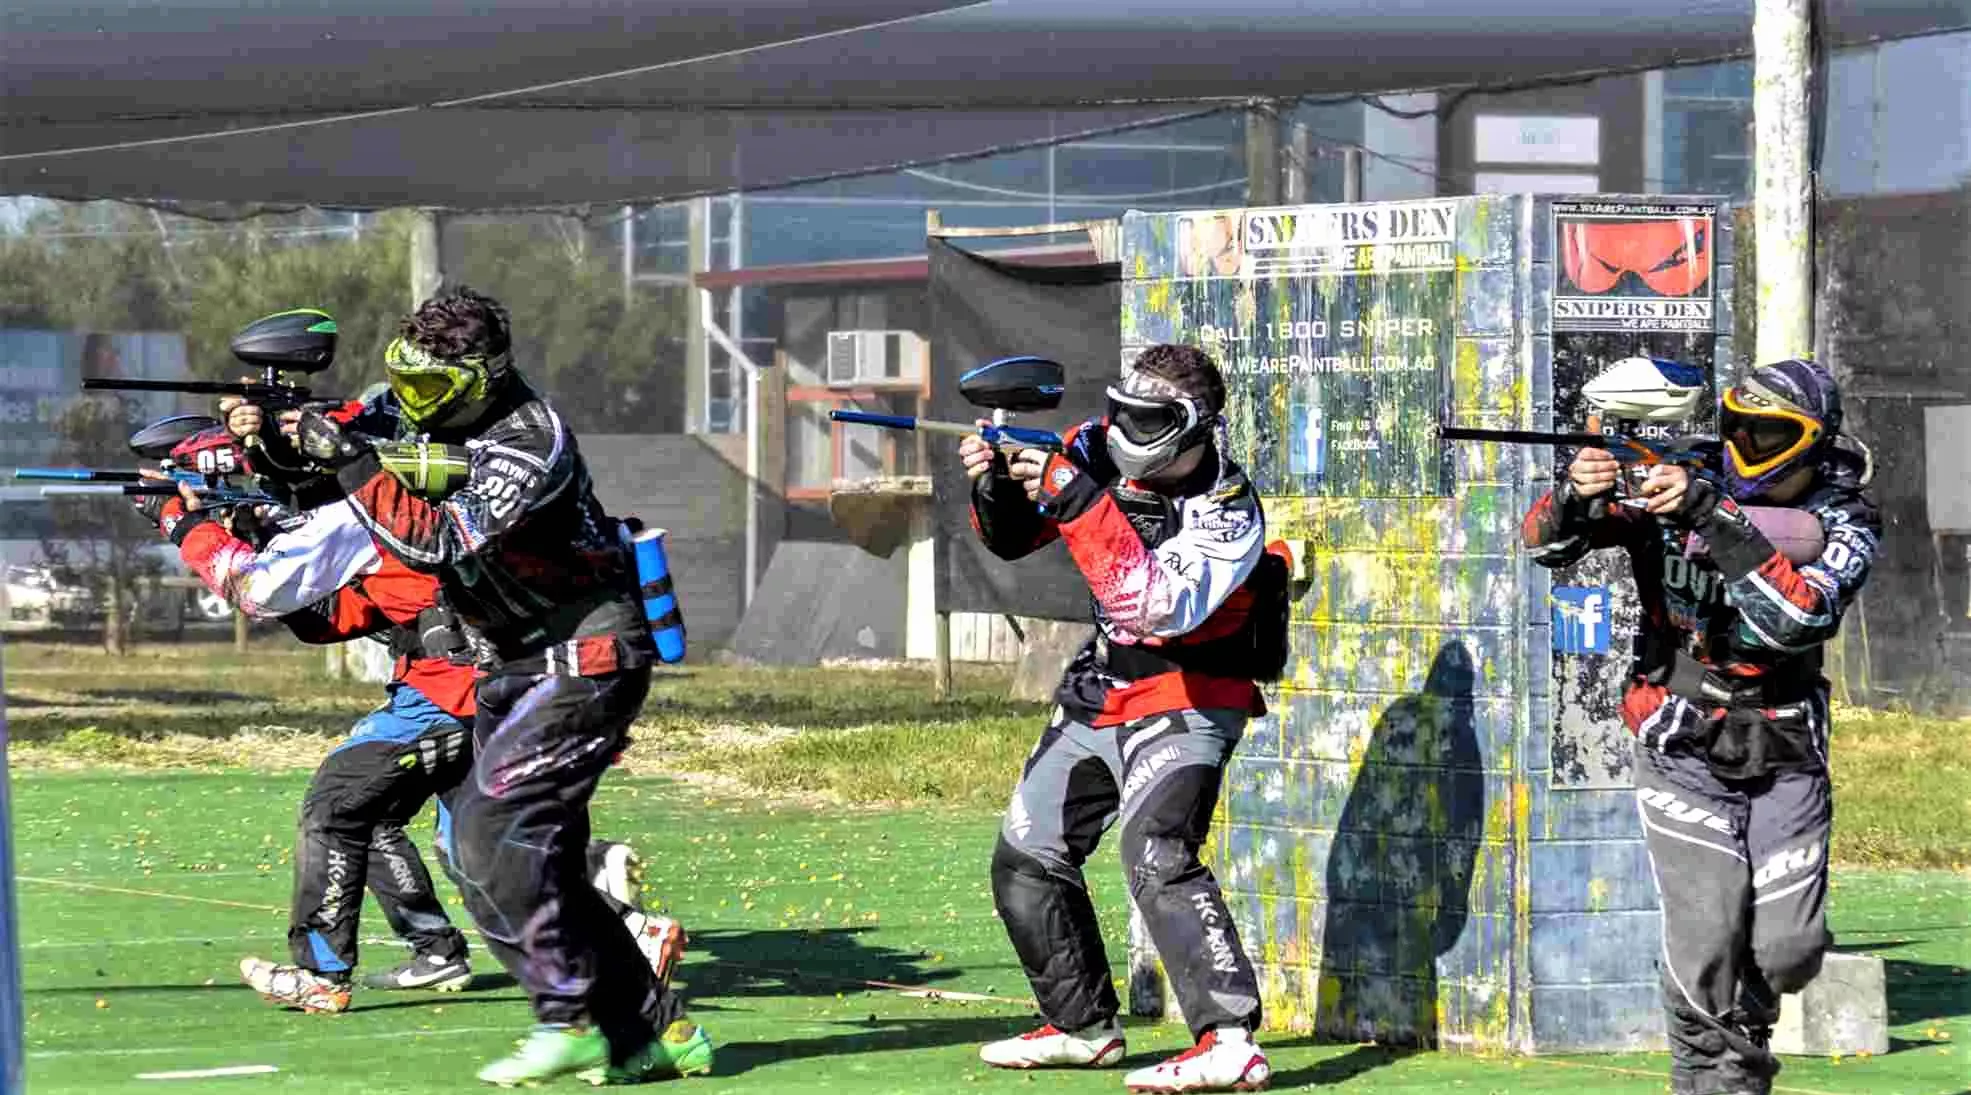 Snipers Den Paintball Melbourne in Australia, Australia and Oceania | Paintball - Rated 4.8